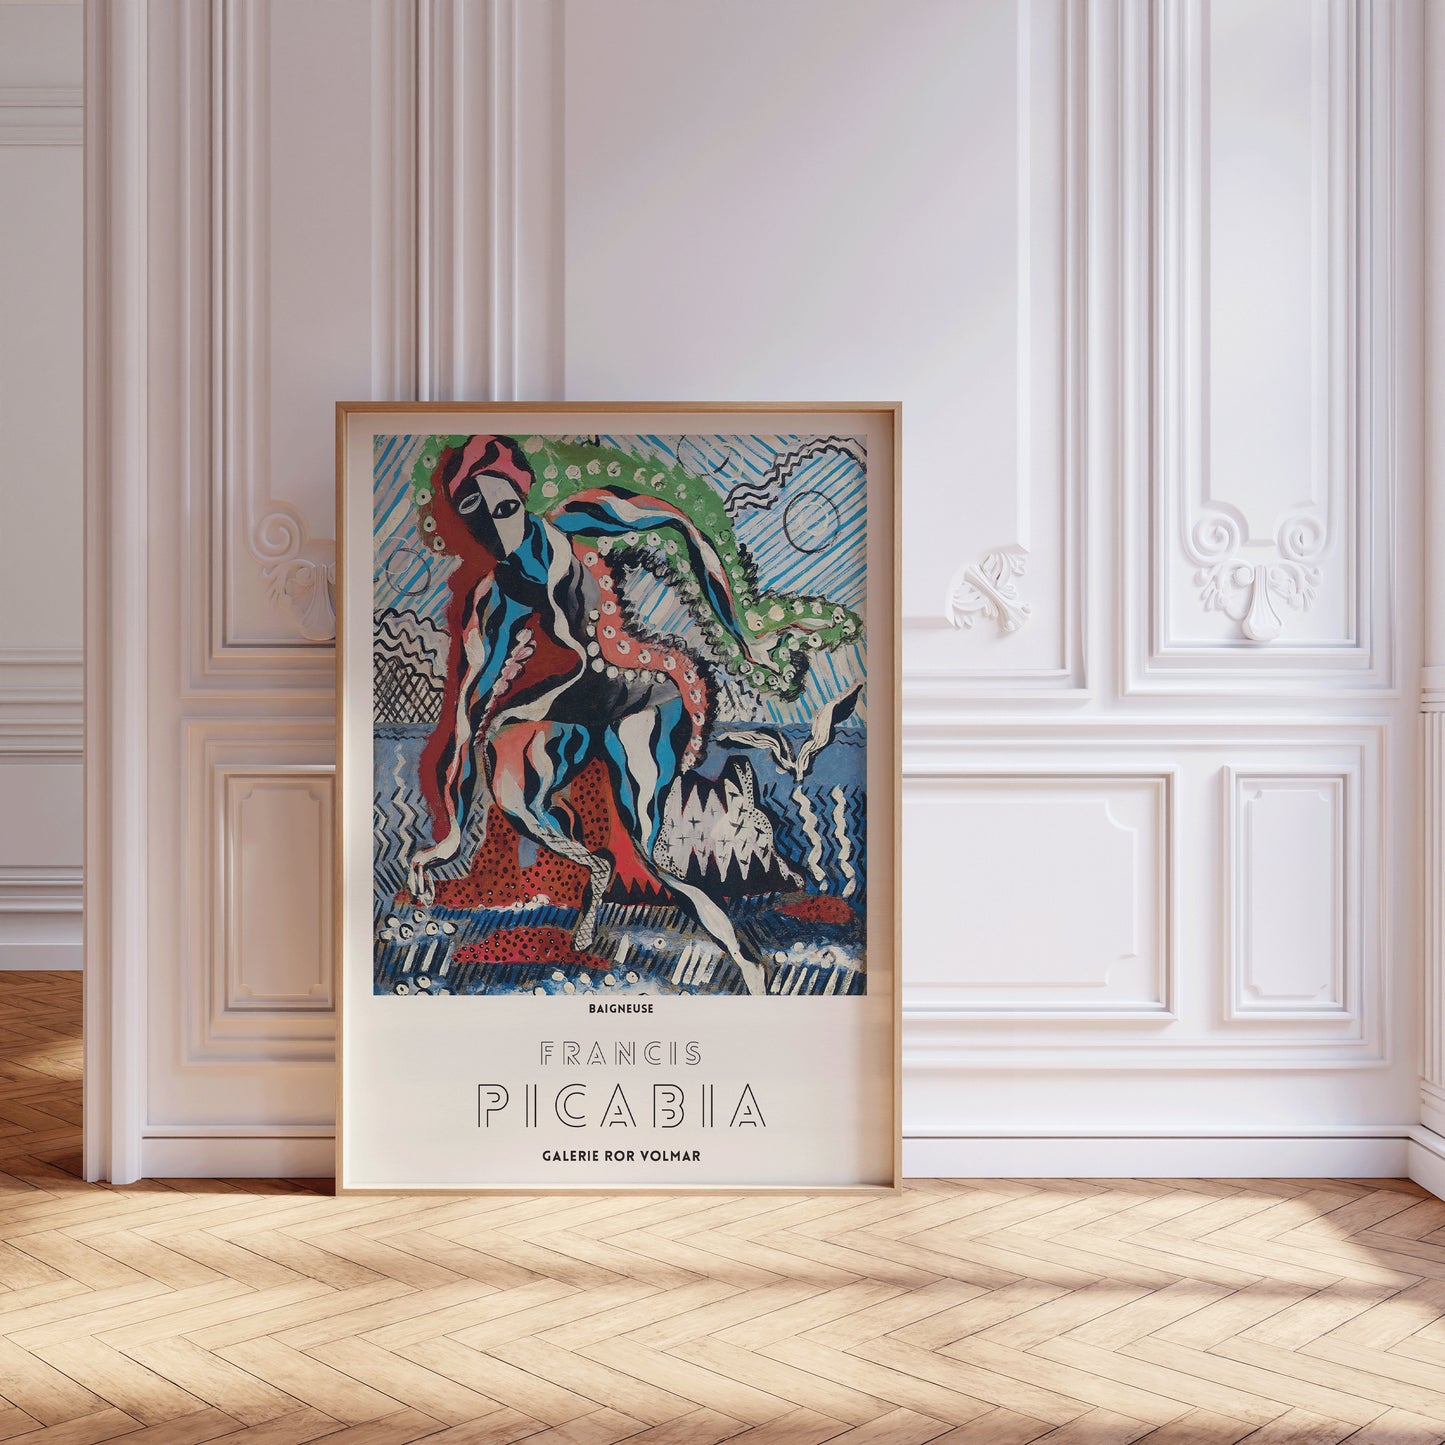 Francis Picabia - Baigneuse | Modern Art (available framed or unframed)